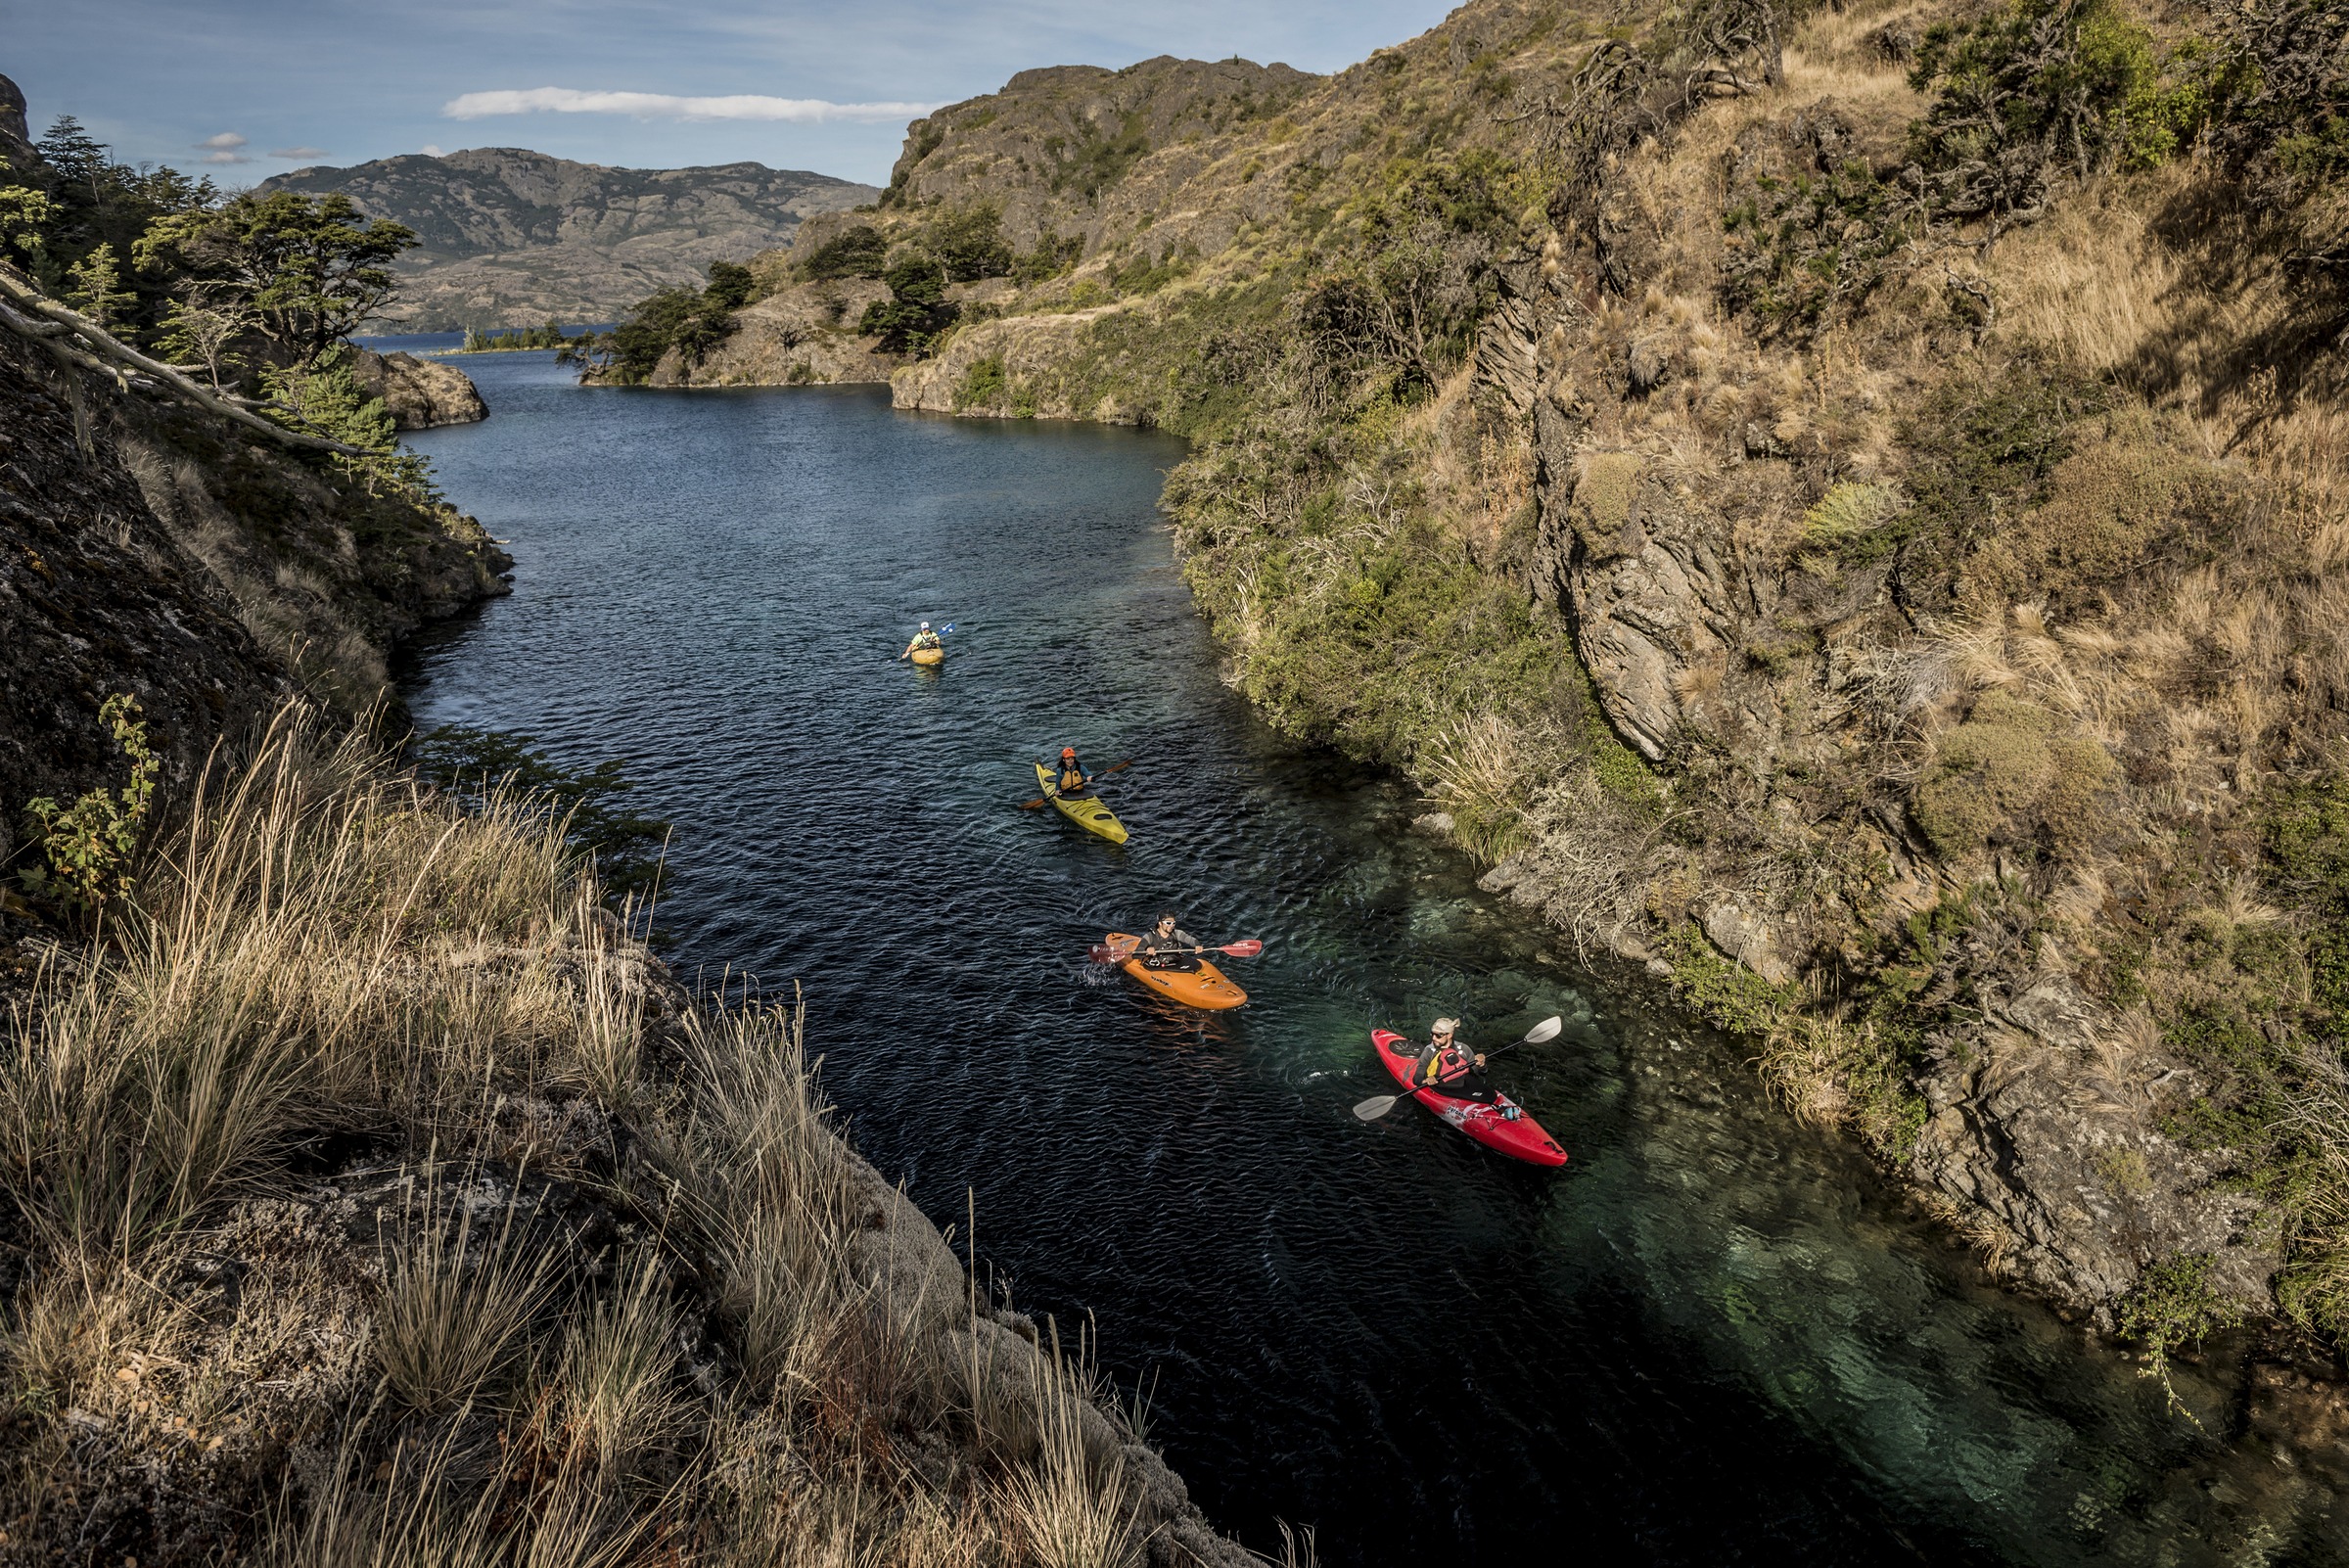 River guides take a group out into the Patagonia National Park in Chile. (Meridith Kohut—The New York Times/Redux)